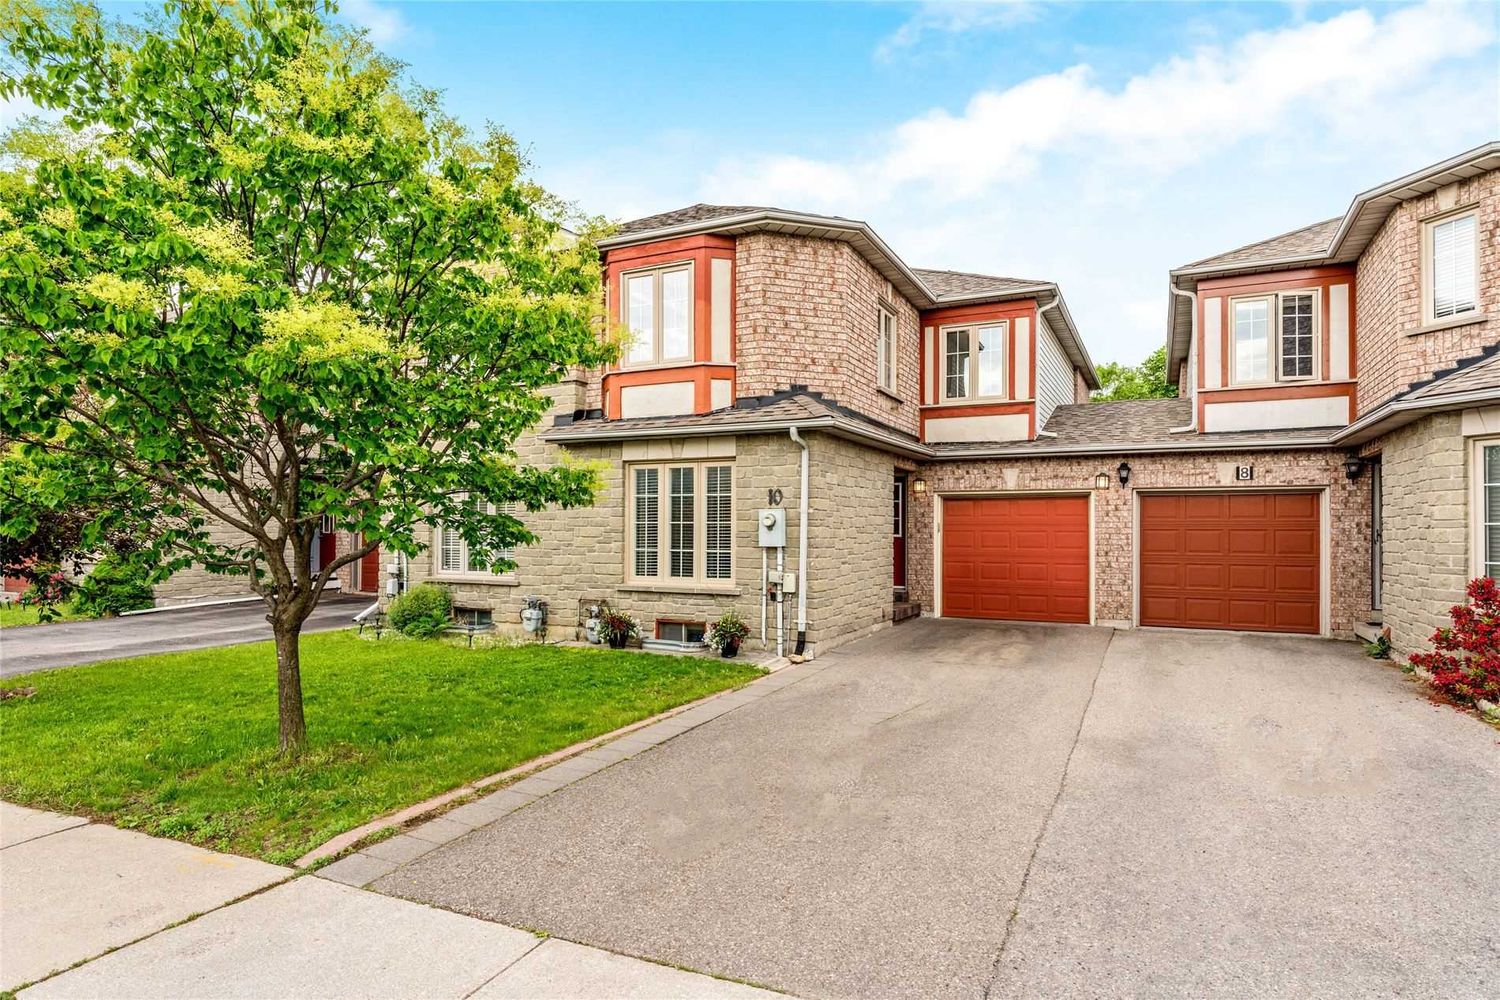 2-143 Pinedale Gate. Pinedale Gate is located in  Vaughan, Toronto - image #1 of 3